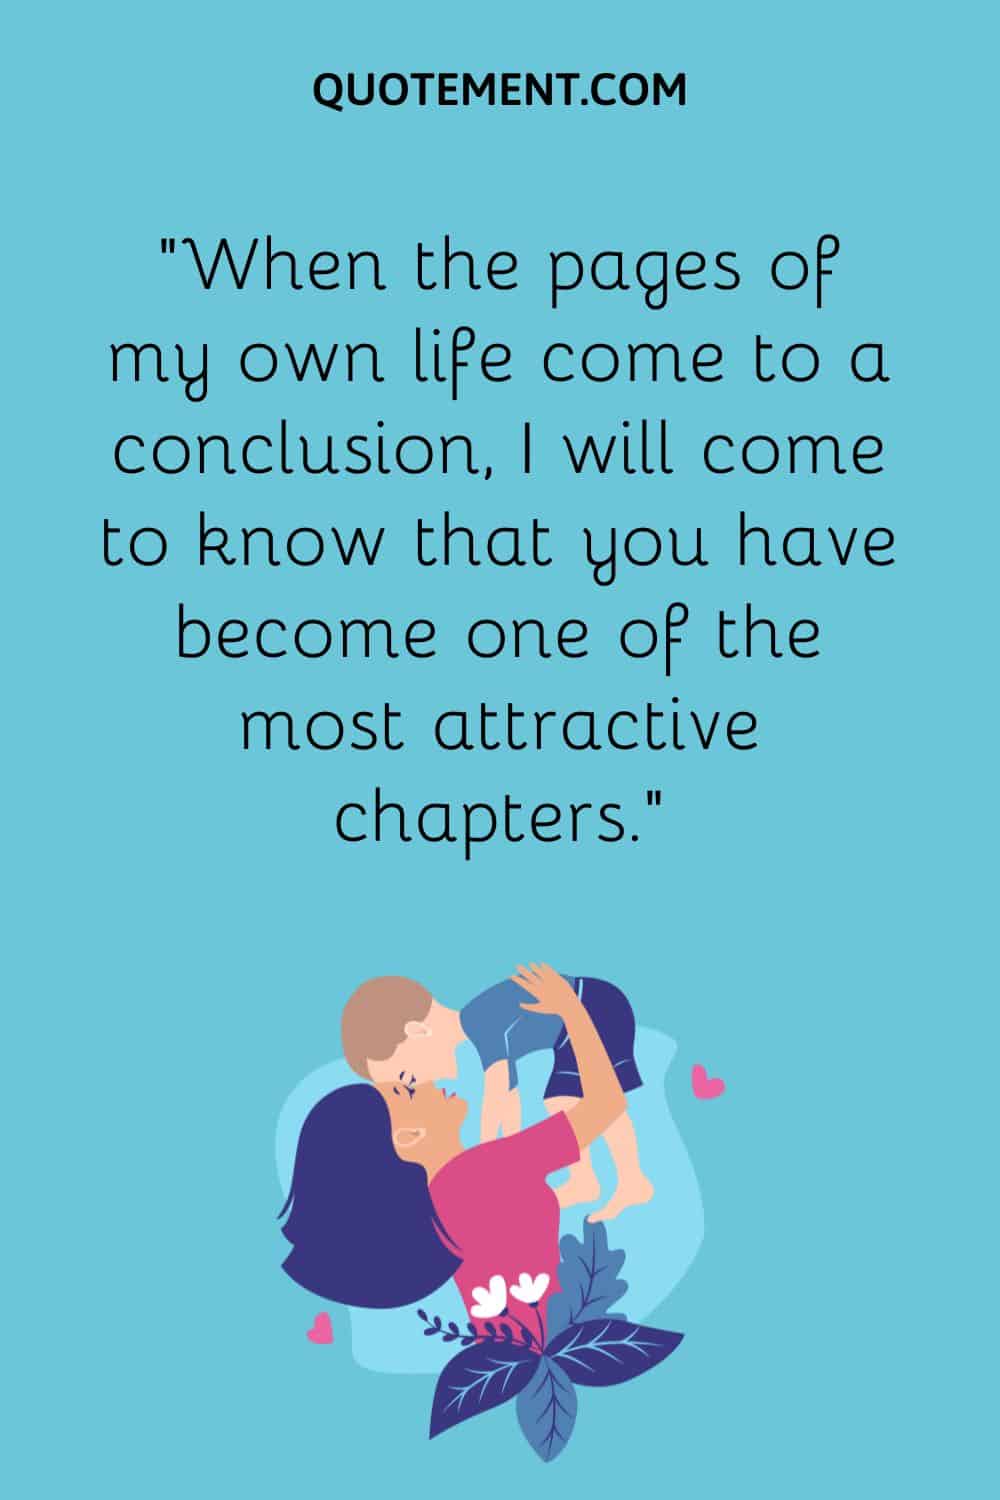 “When the pages of my own life come to a conclusion, I will come to know that you have become one of the most attractive chapters.”